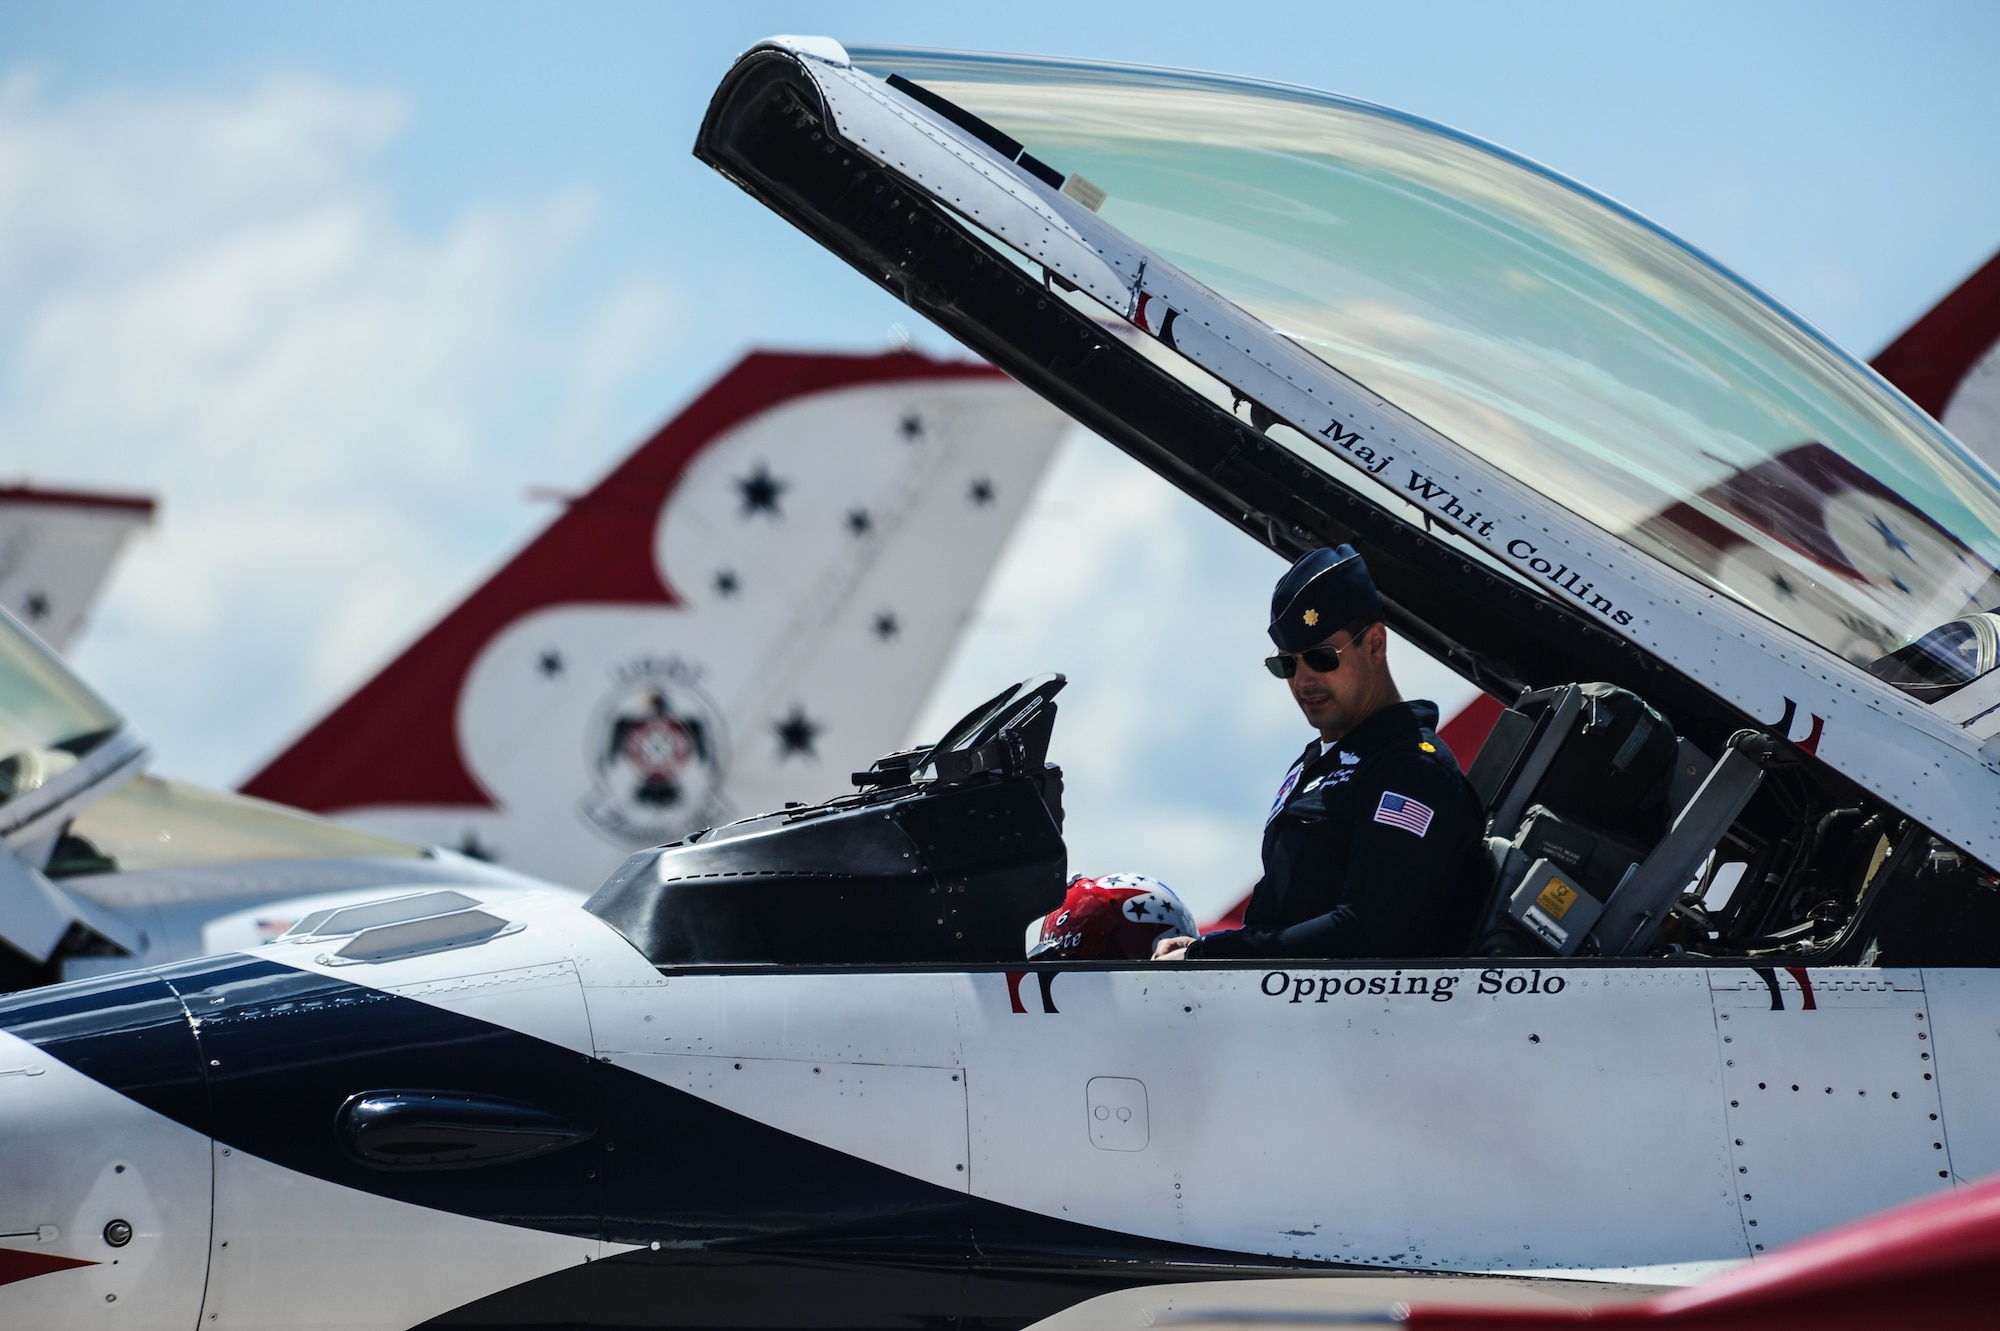 Maj. Whit Collins, Air Force Thunderbirds opposing solo pilot, arrives at Peterson Air Force Base, Colorado, May 22, 2017. The Thunderbirds conducted an aerial demonstration performance during the Air Force Academy's graduation May 24, 2017. (U.S. Air Force photo/Tech. Sgt. Julius Delos Reyes)